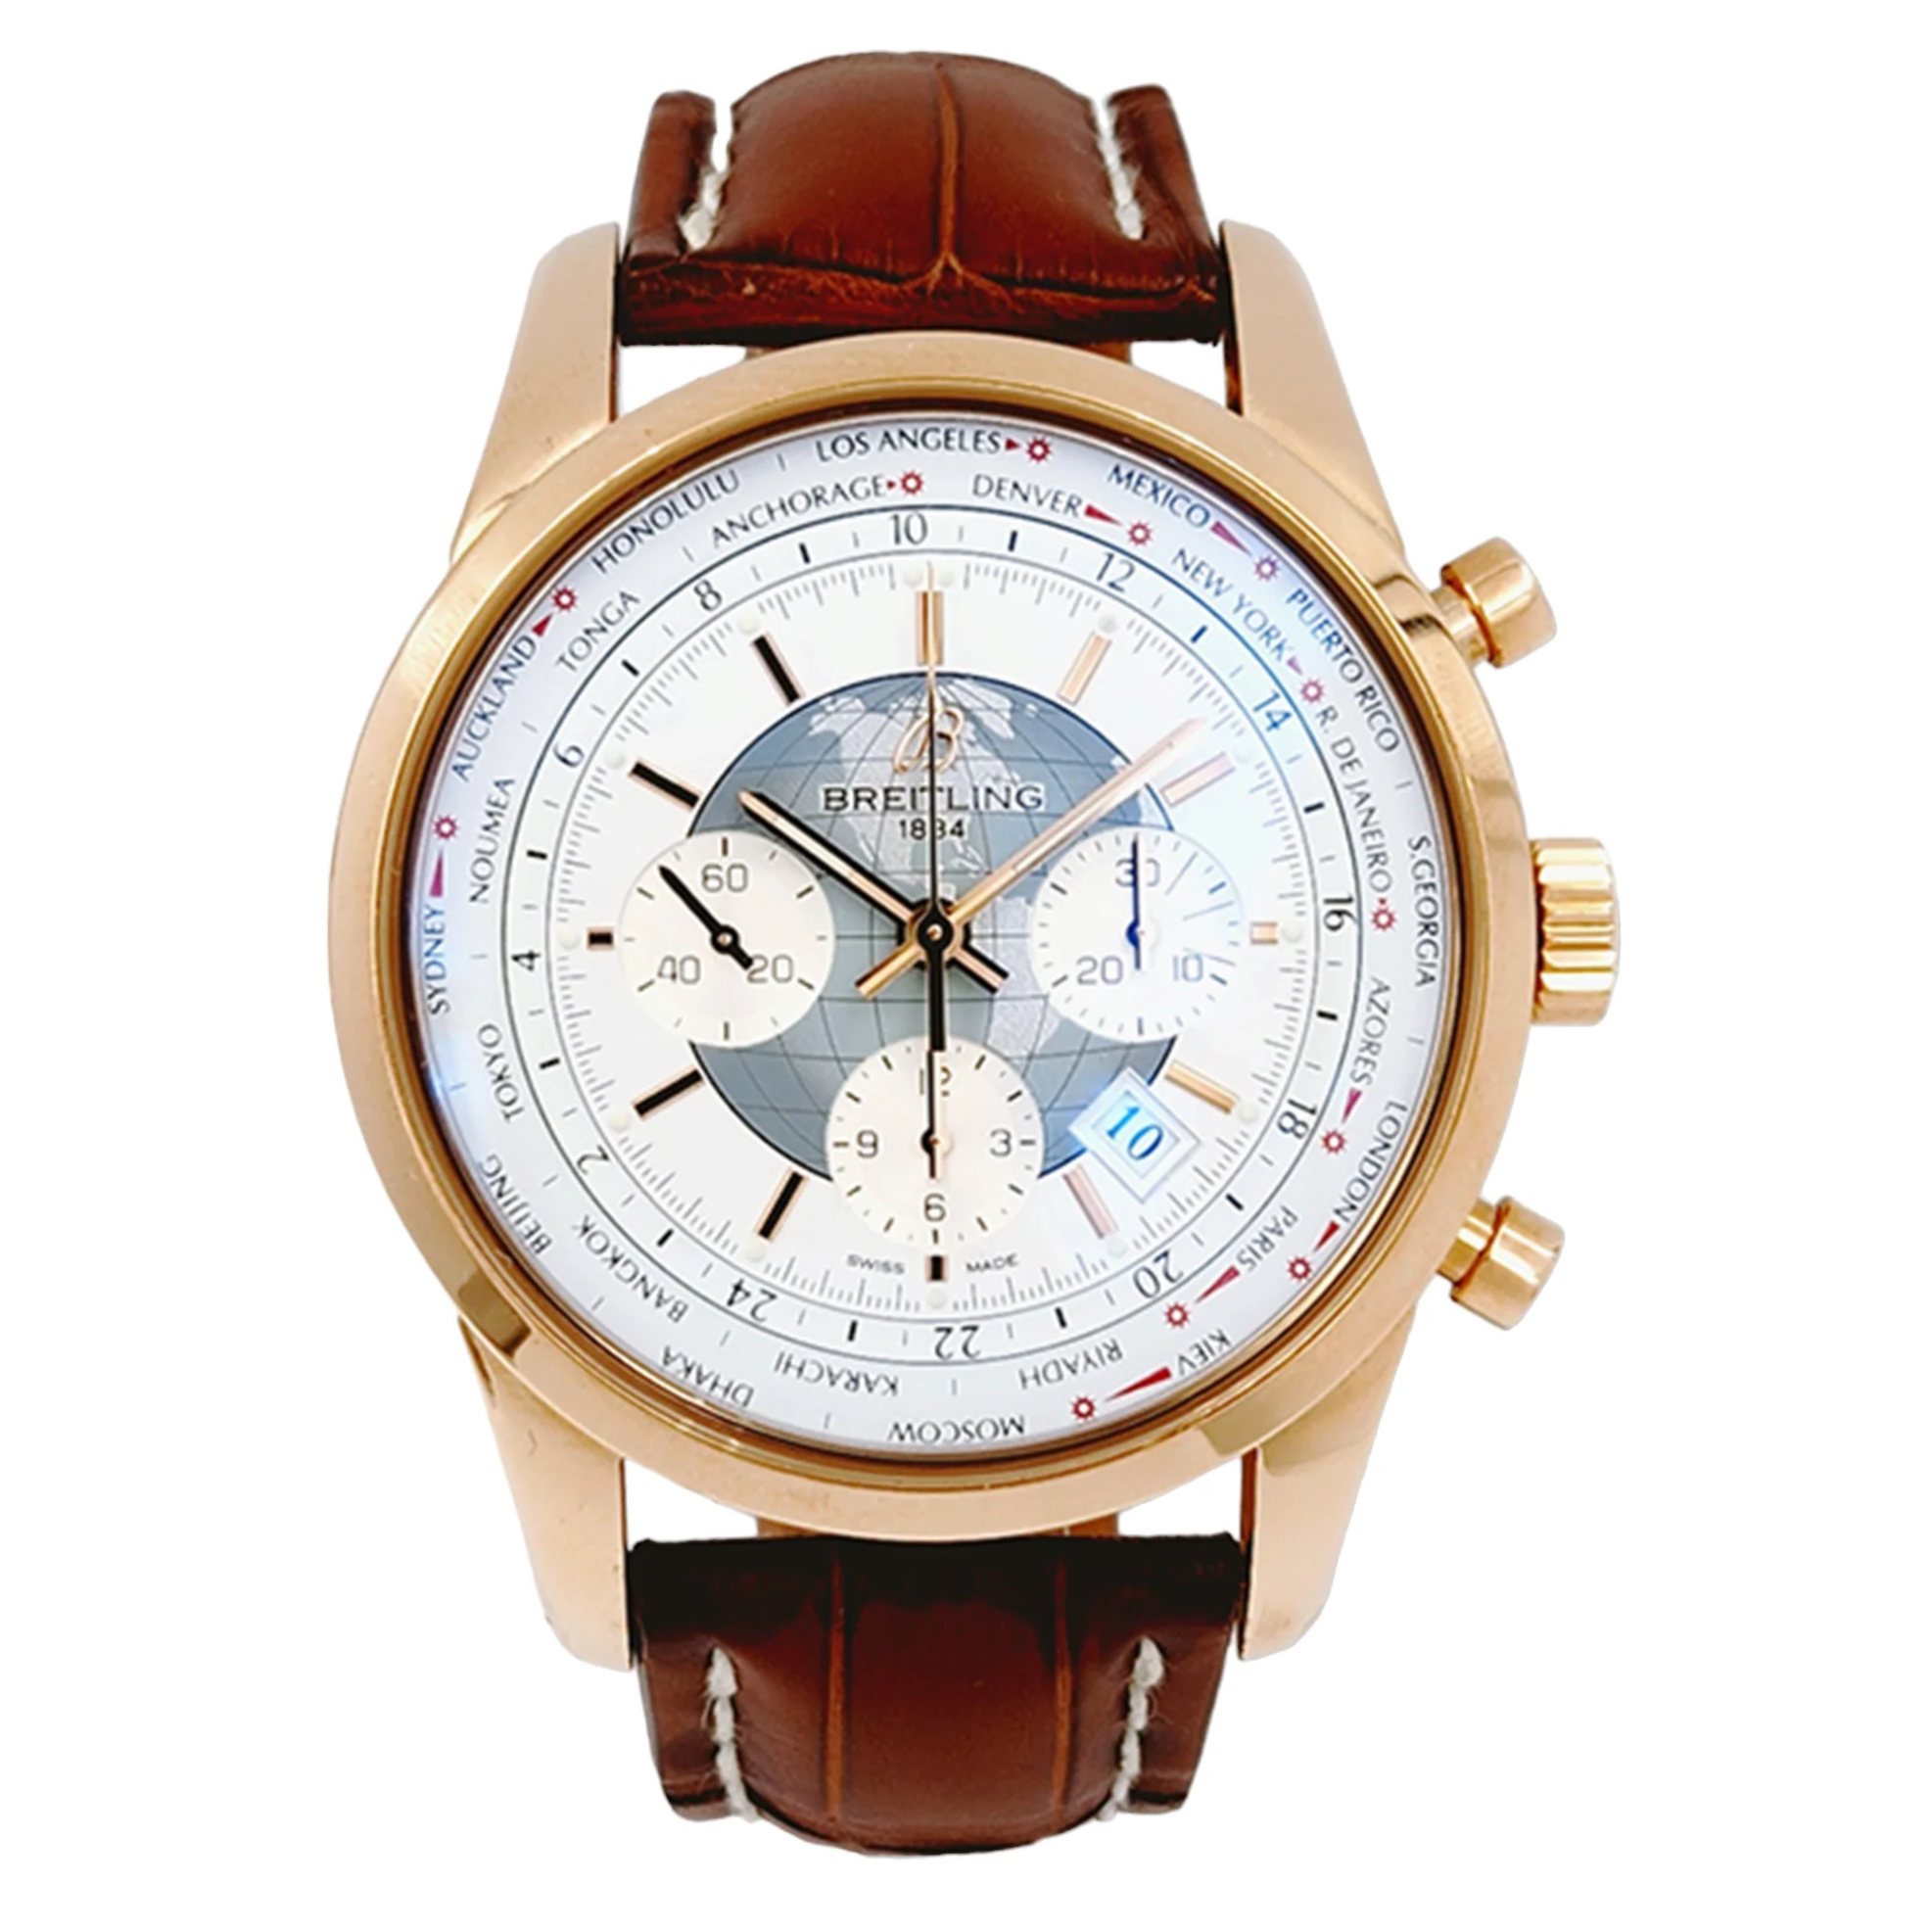 Men's Breitling 46mm Transocean Watch in 18K Rose Gold with Brown Leather Band and White Chronograph Dial. (Pre-Owned)